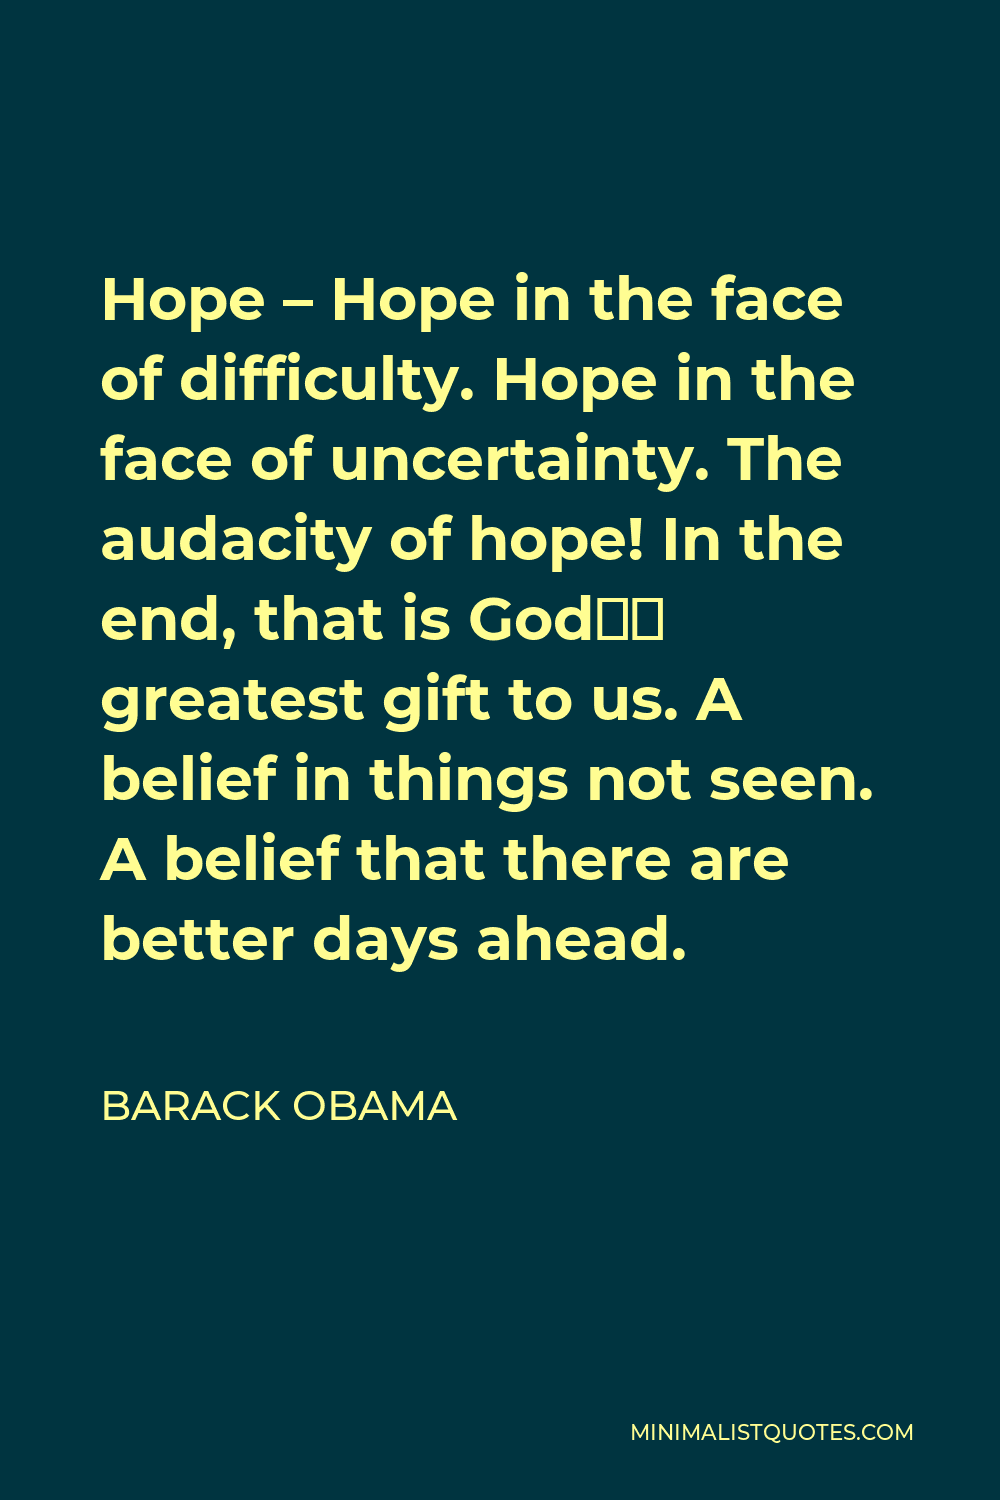 Barack Obama Quote - Hope – Hope in the face of difficulty. Hope in the face of uncertainty. The audacity of hope! In the end, that is God’s greatest gift to us. A belief in things not seen. A belief that there are better days ahead.